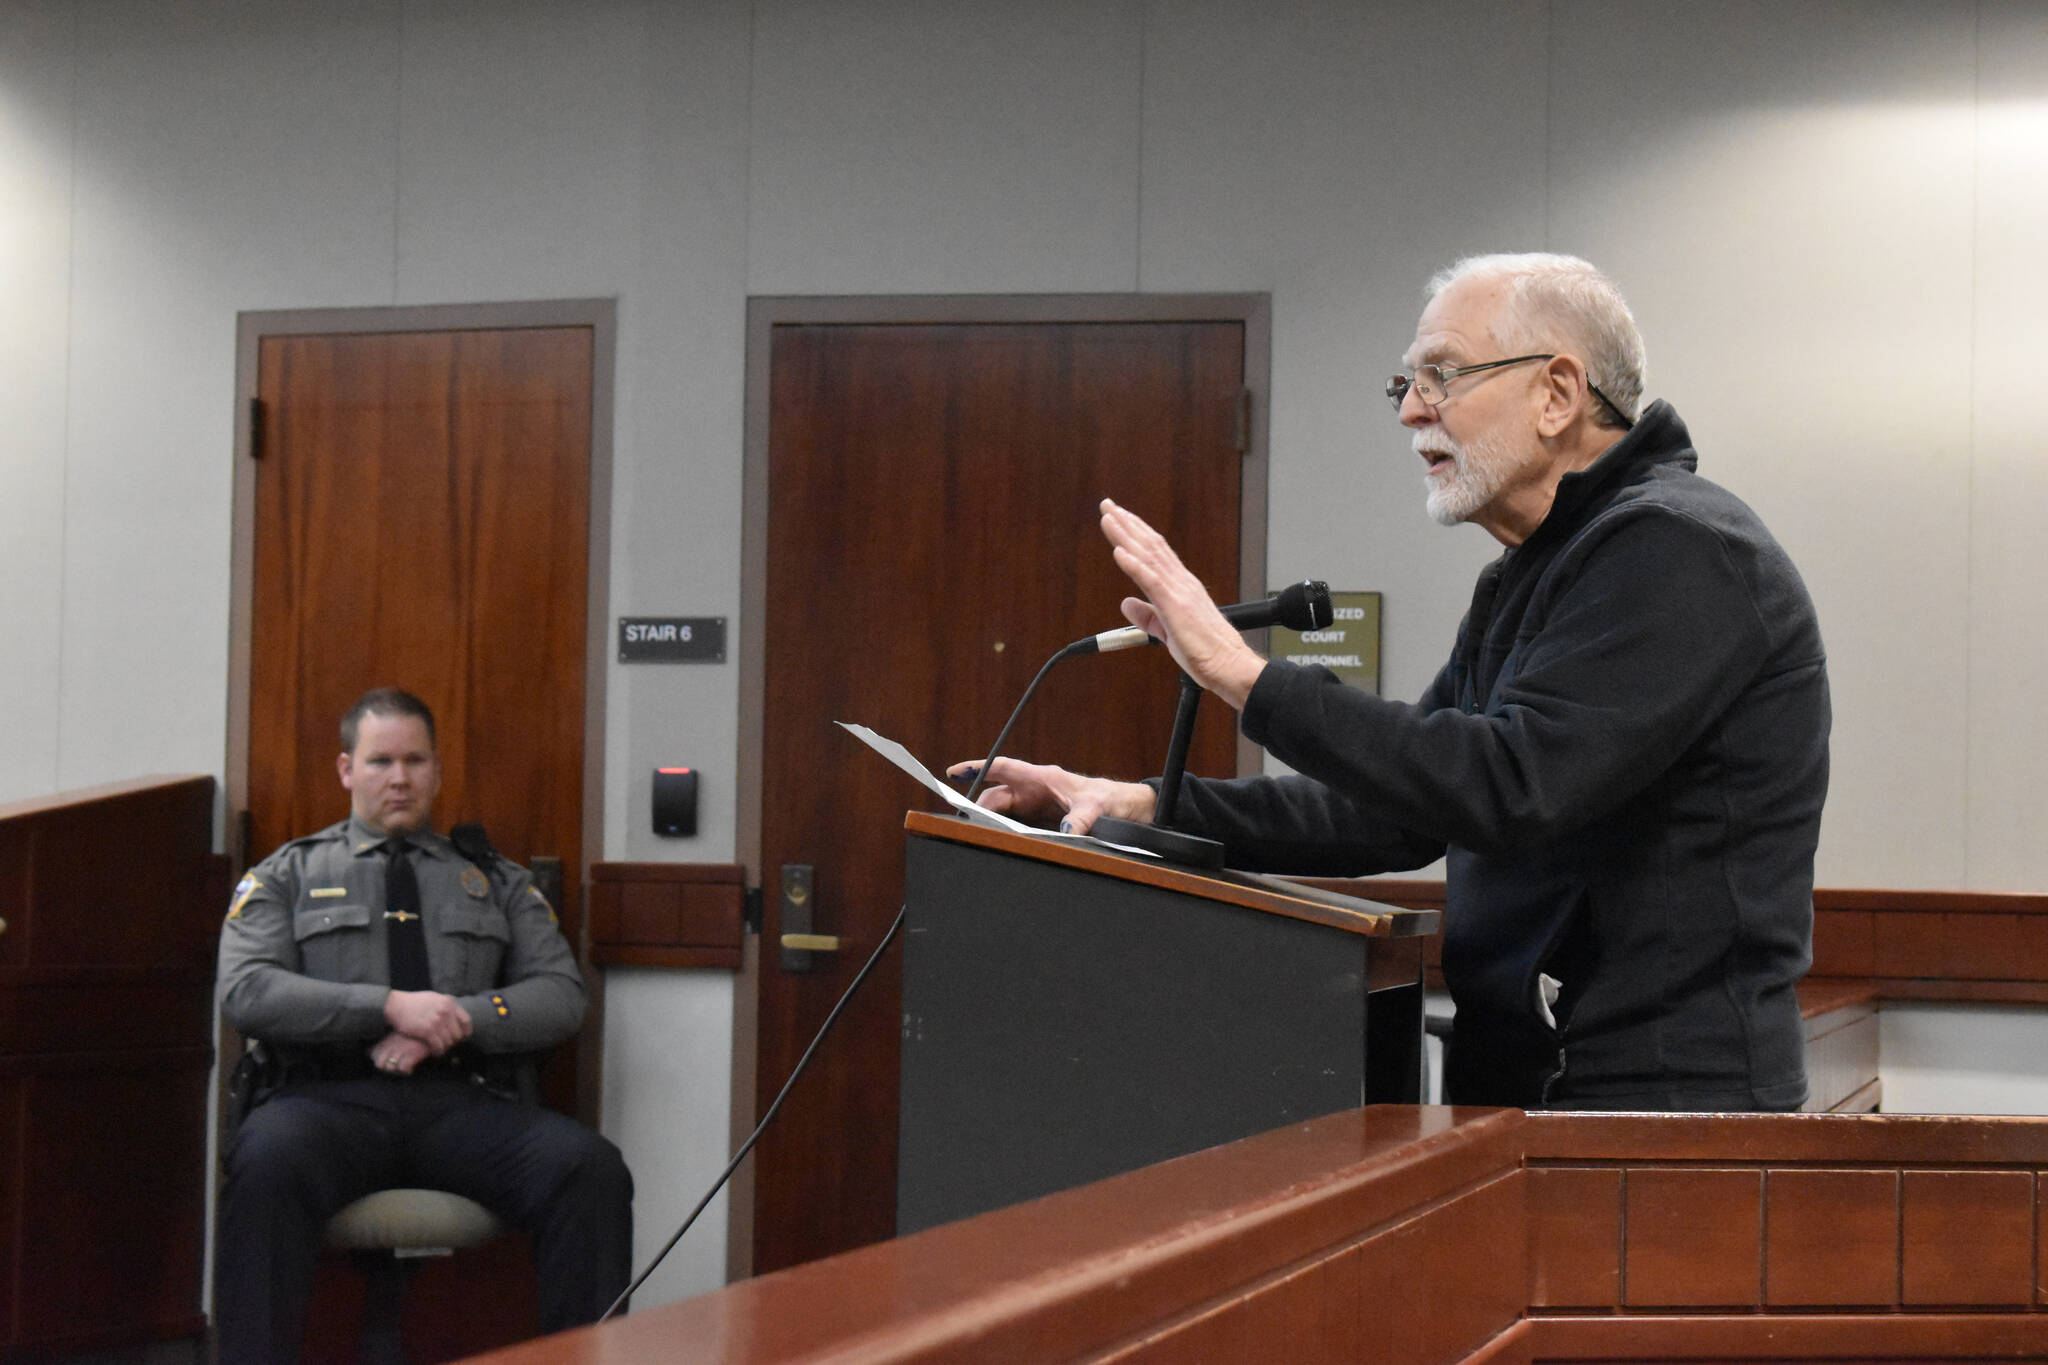 Ray Southwell speaks during the public hearing being held in the selection process for a new Kenai Superior Court judge Monday, January 23, 2023 at the Kenai Courthouse in Kenai, Alaska.  (Jake Dye/Clarion Peninsula)